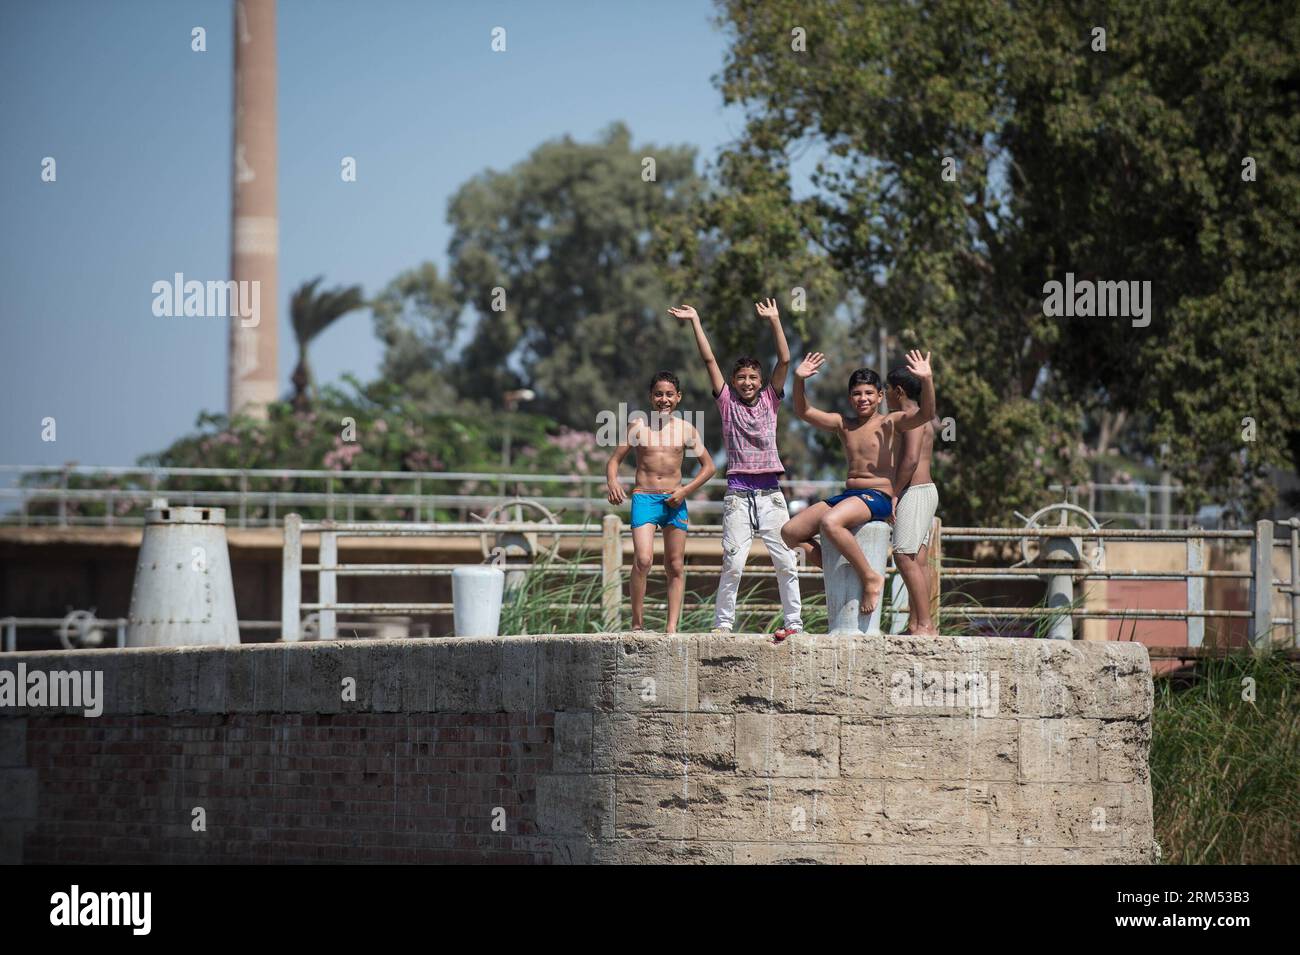 Bildnummer: 60561975  Datum: 04.10.2013  Copyright: imago/Xinhua Children wave on the river bank of Nile in a villiage near Shibin Al Kawm, capital of Monufia Governorate, Egypt, on Oct. 4, 2013. Monufia is a mainly agricultural governorate in Egypt, located to the north of Cairo. It is known particularly as the birthplace of two Egyptian presidents, Anwar Sadat and Hosni Mubarak. (Xinhua/Pan Chaoyue) EGYPT-MONUFIA-DAILY LIFE PUBLICATIONxNOTxINxCHN xas x0x 2013 quer     60561975 Date 04 10 2013 Copyright Imago XINHUA Children Wave ON The River Bank of Nile in a Villiage Near  Al  Capital of  G Stock Photo